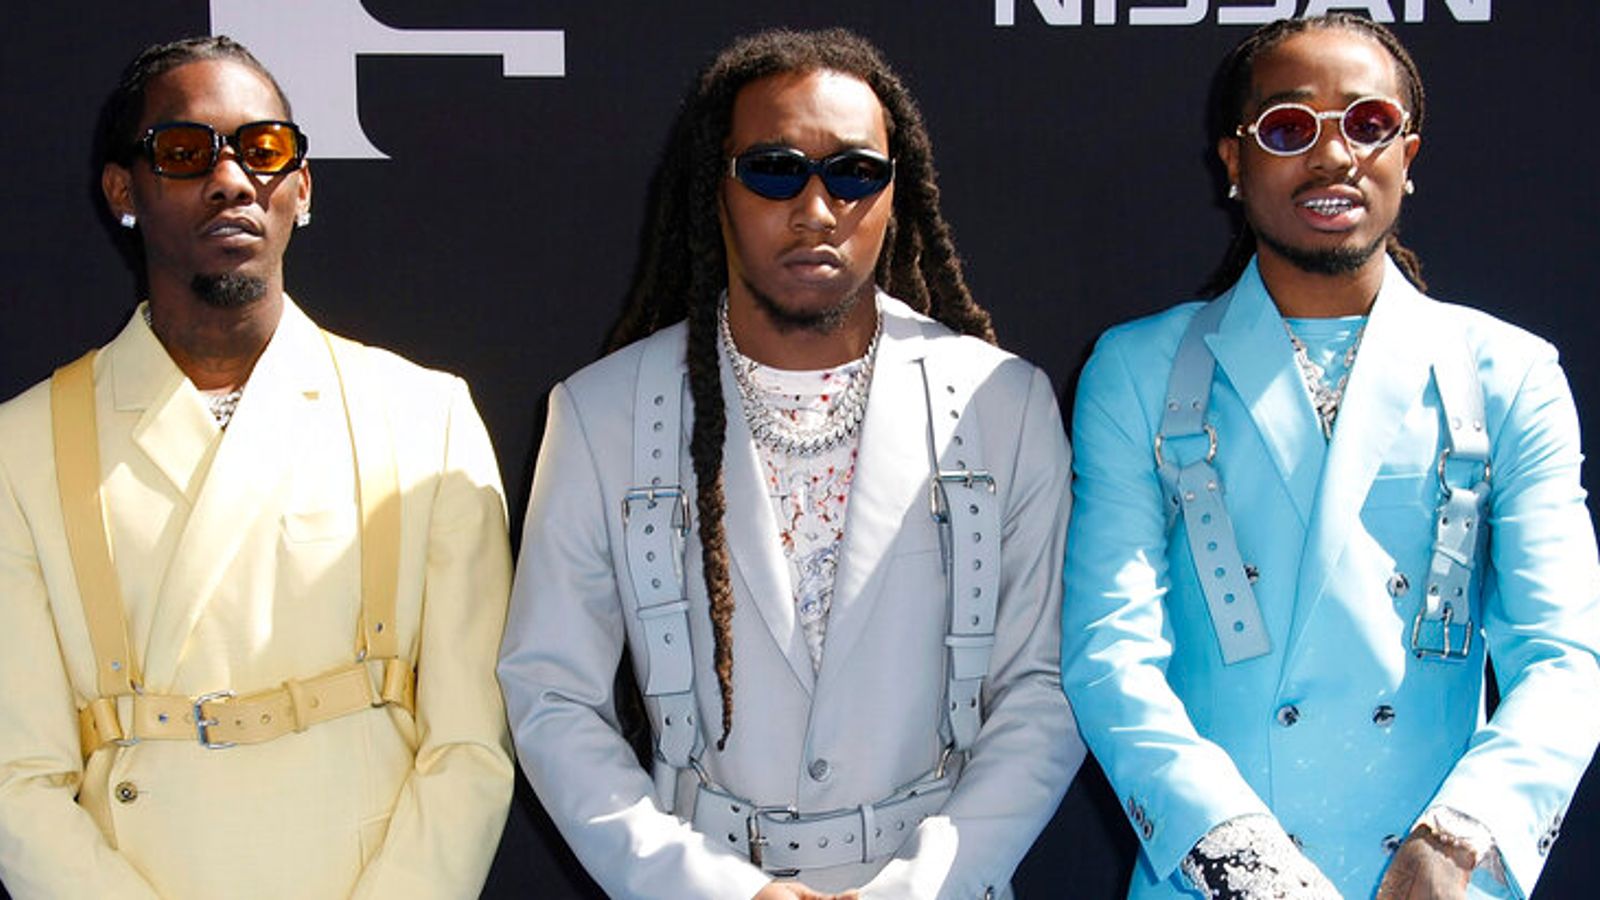 Takeoff tribute: Migos rapper Offset breaks silence on cousin and bandmate's fatal shooting, saying his heart is 'shattered'